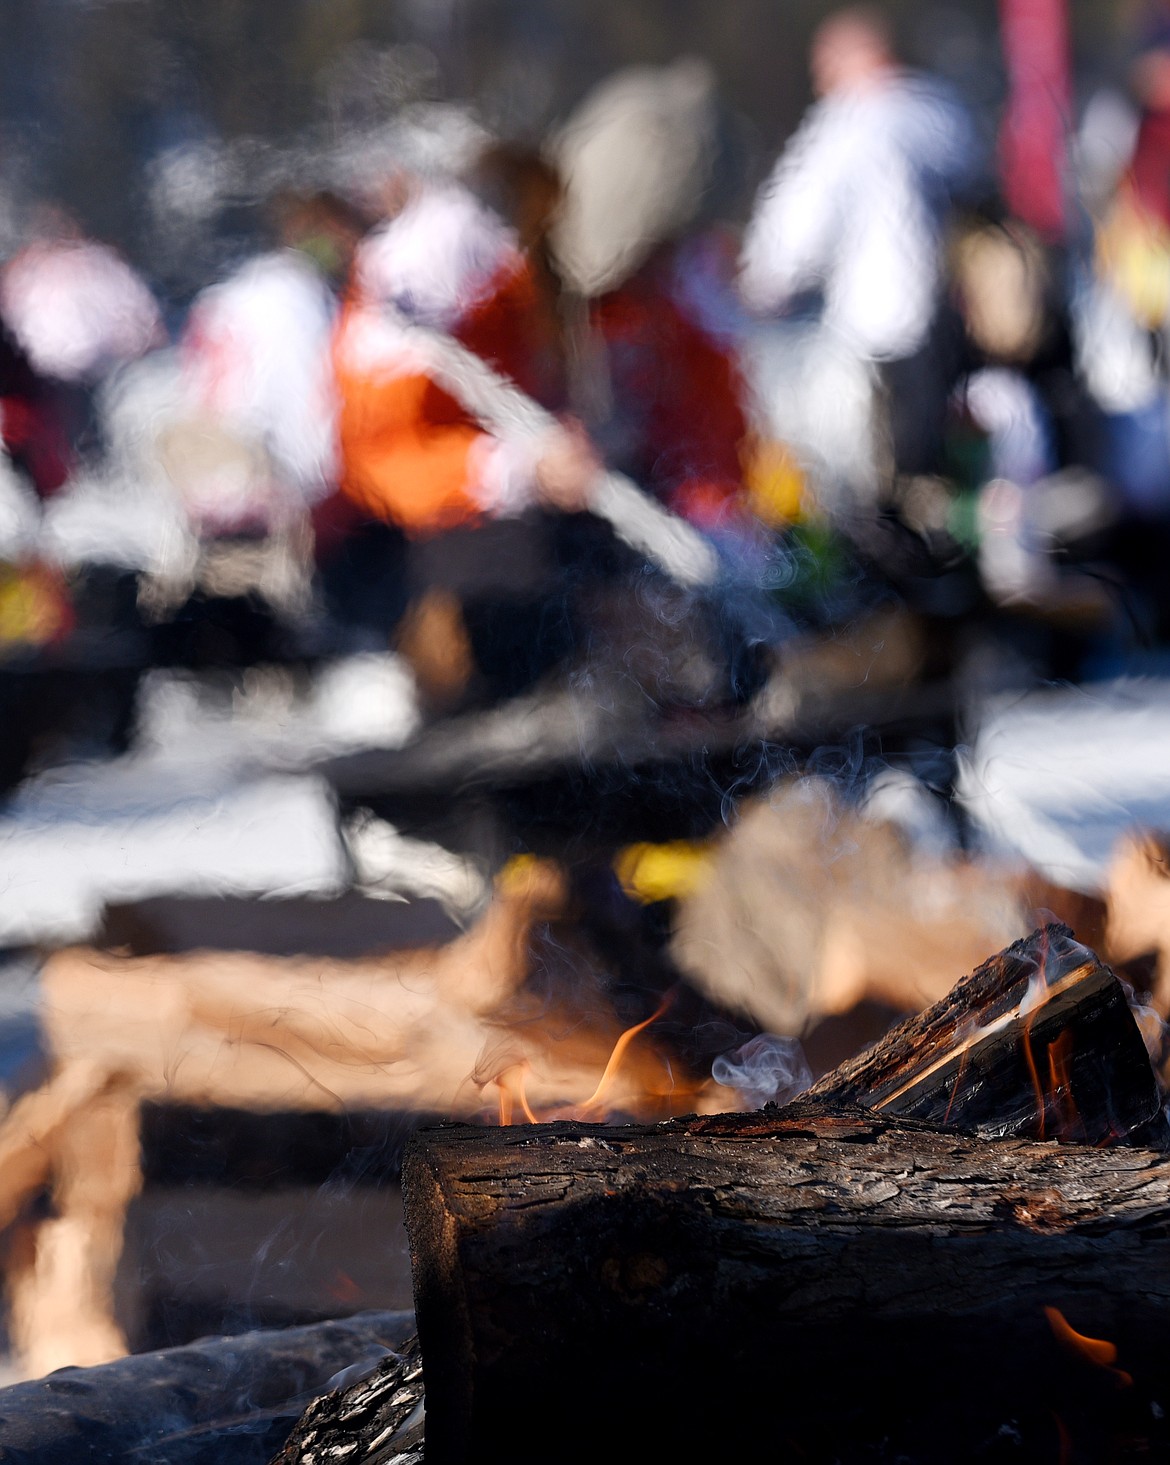 Players warm themselves by the fire during the Montana Pond Hockey Classic at Foys Lake on Friday. (Aaric Bryan/Daily Inter Lake)